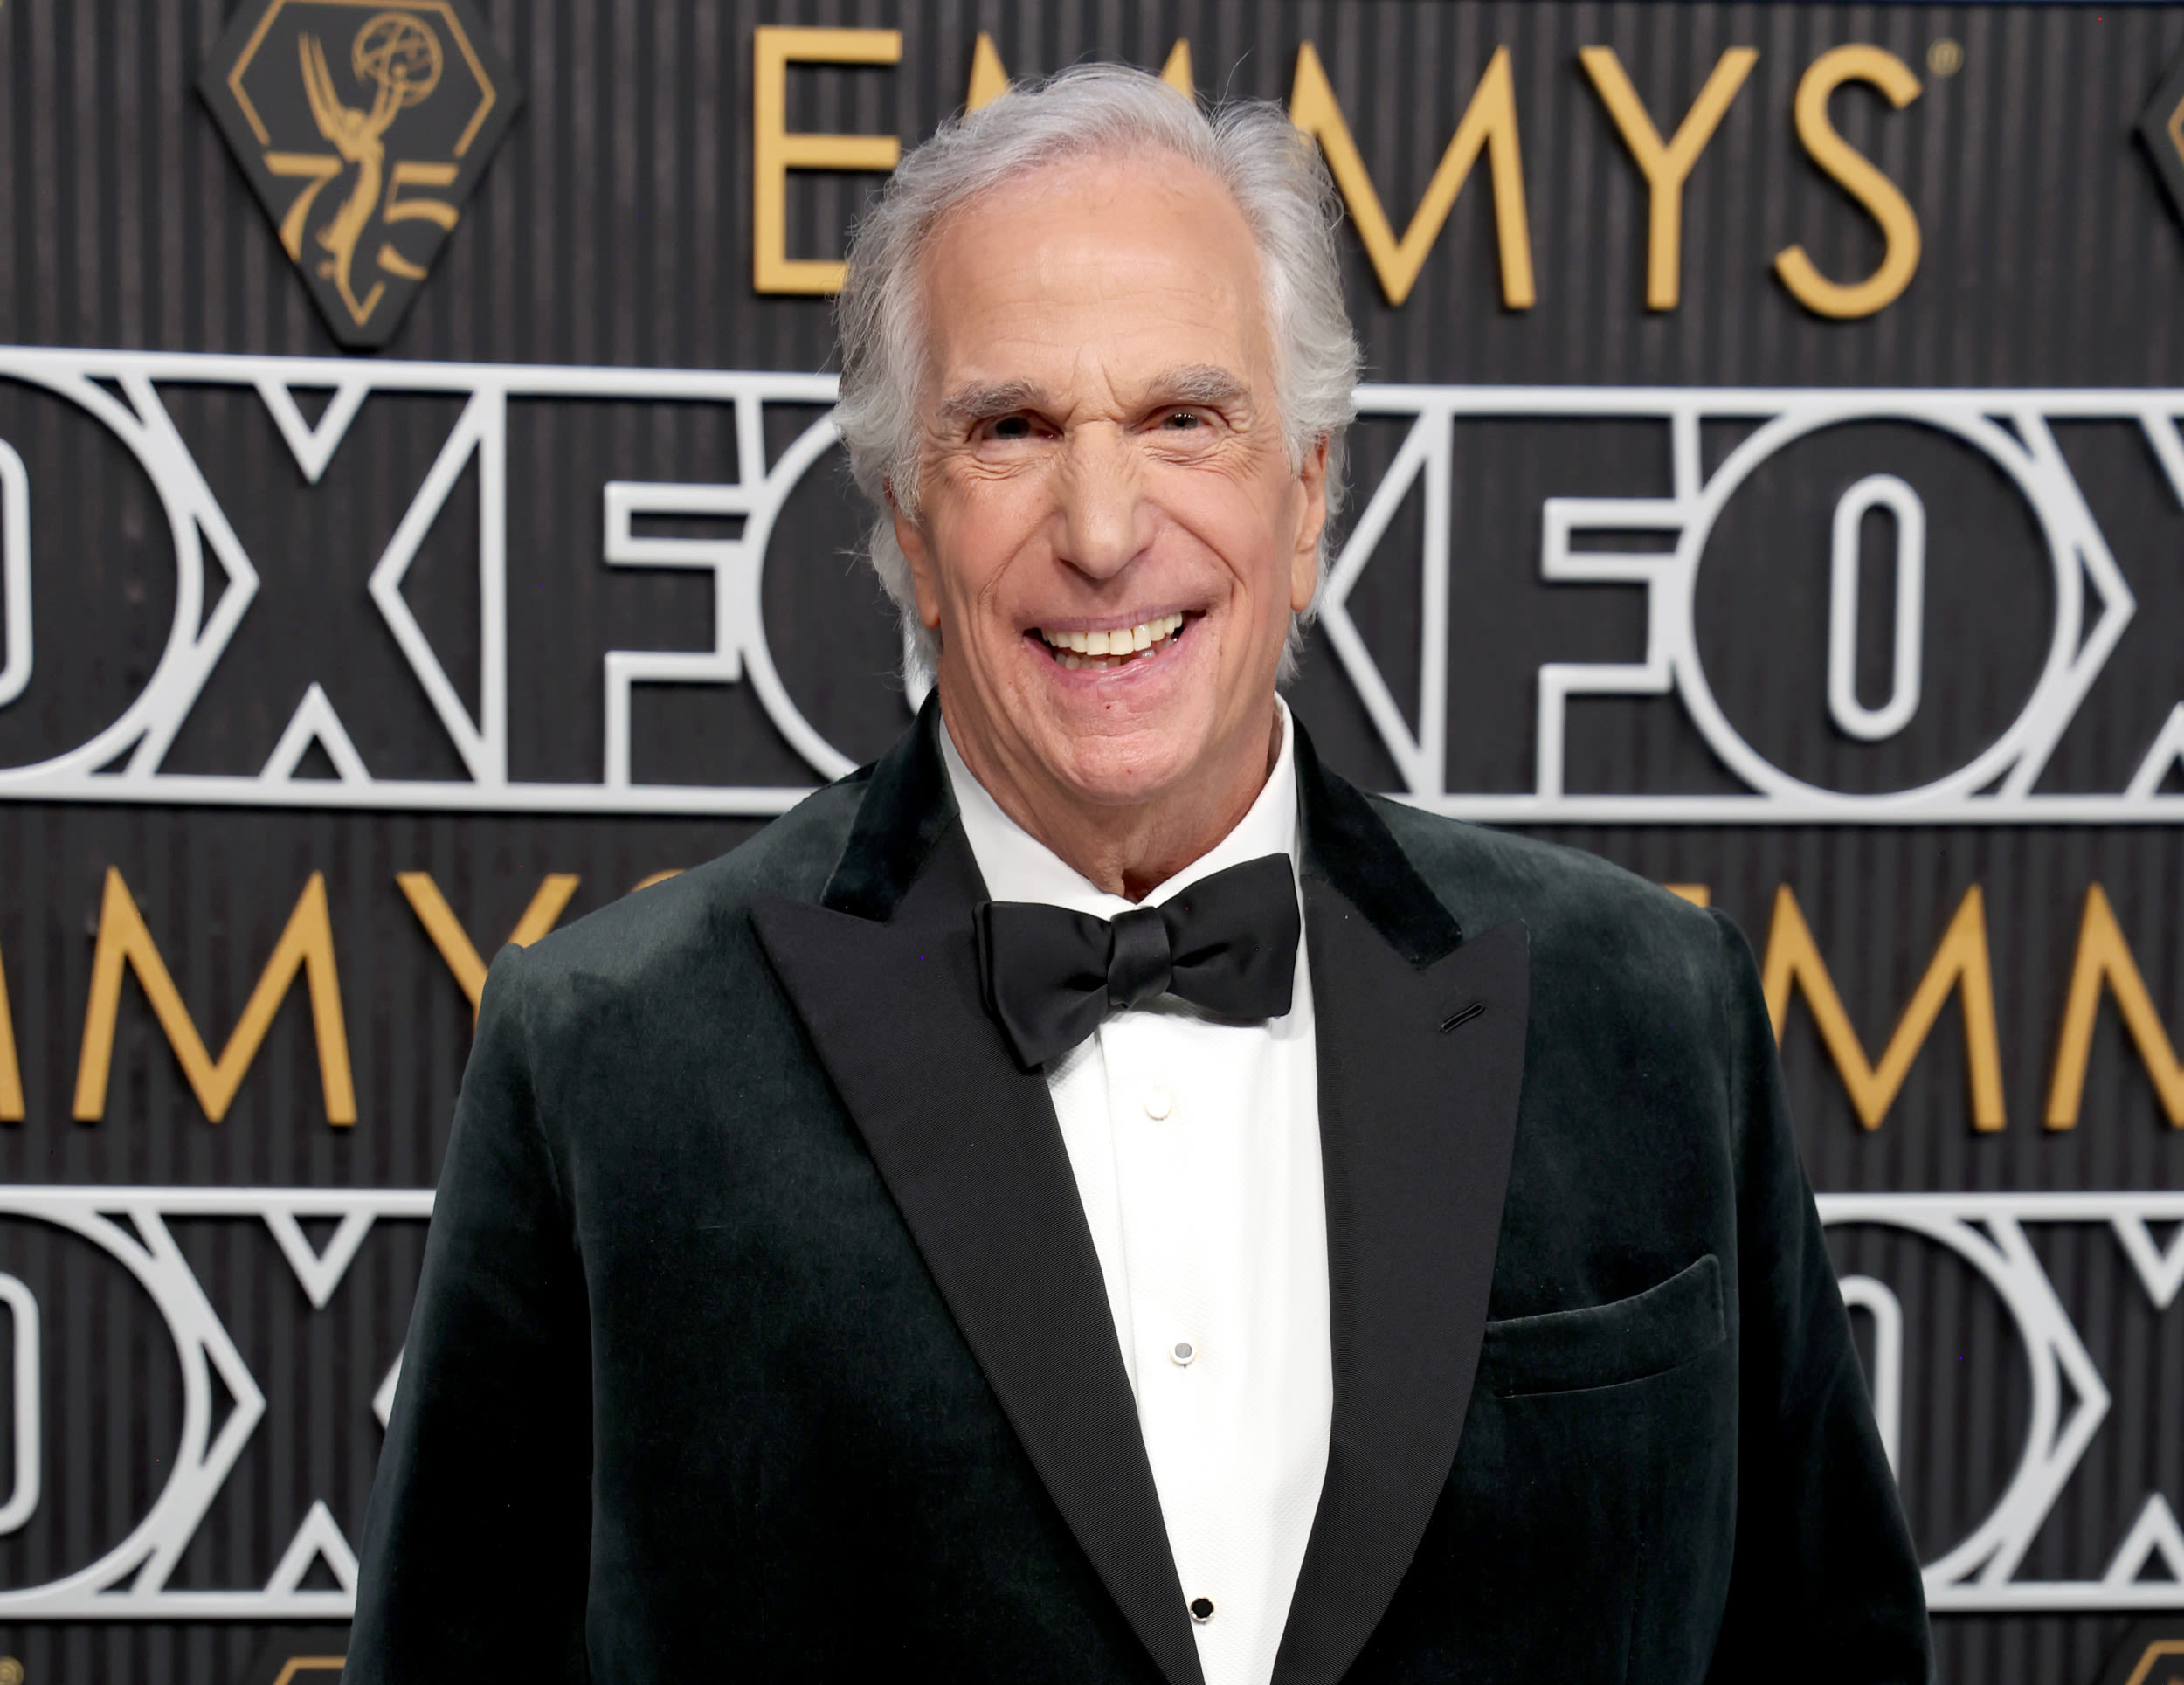 Henry Winkler's Trump video query gains traction online